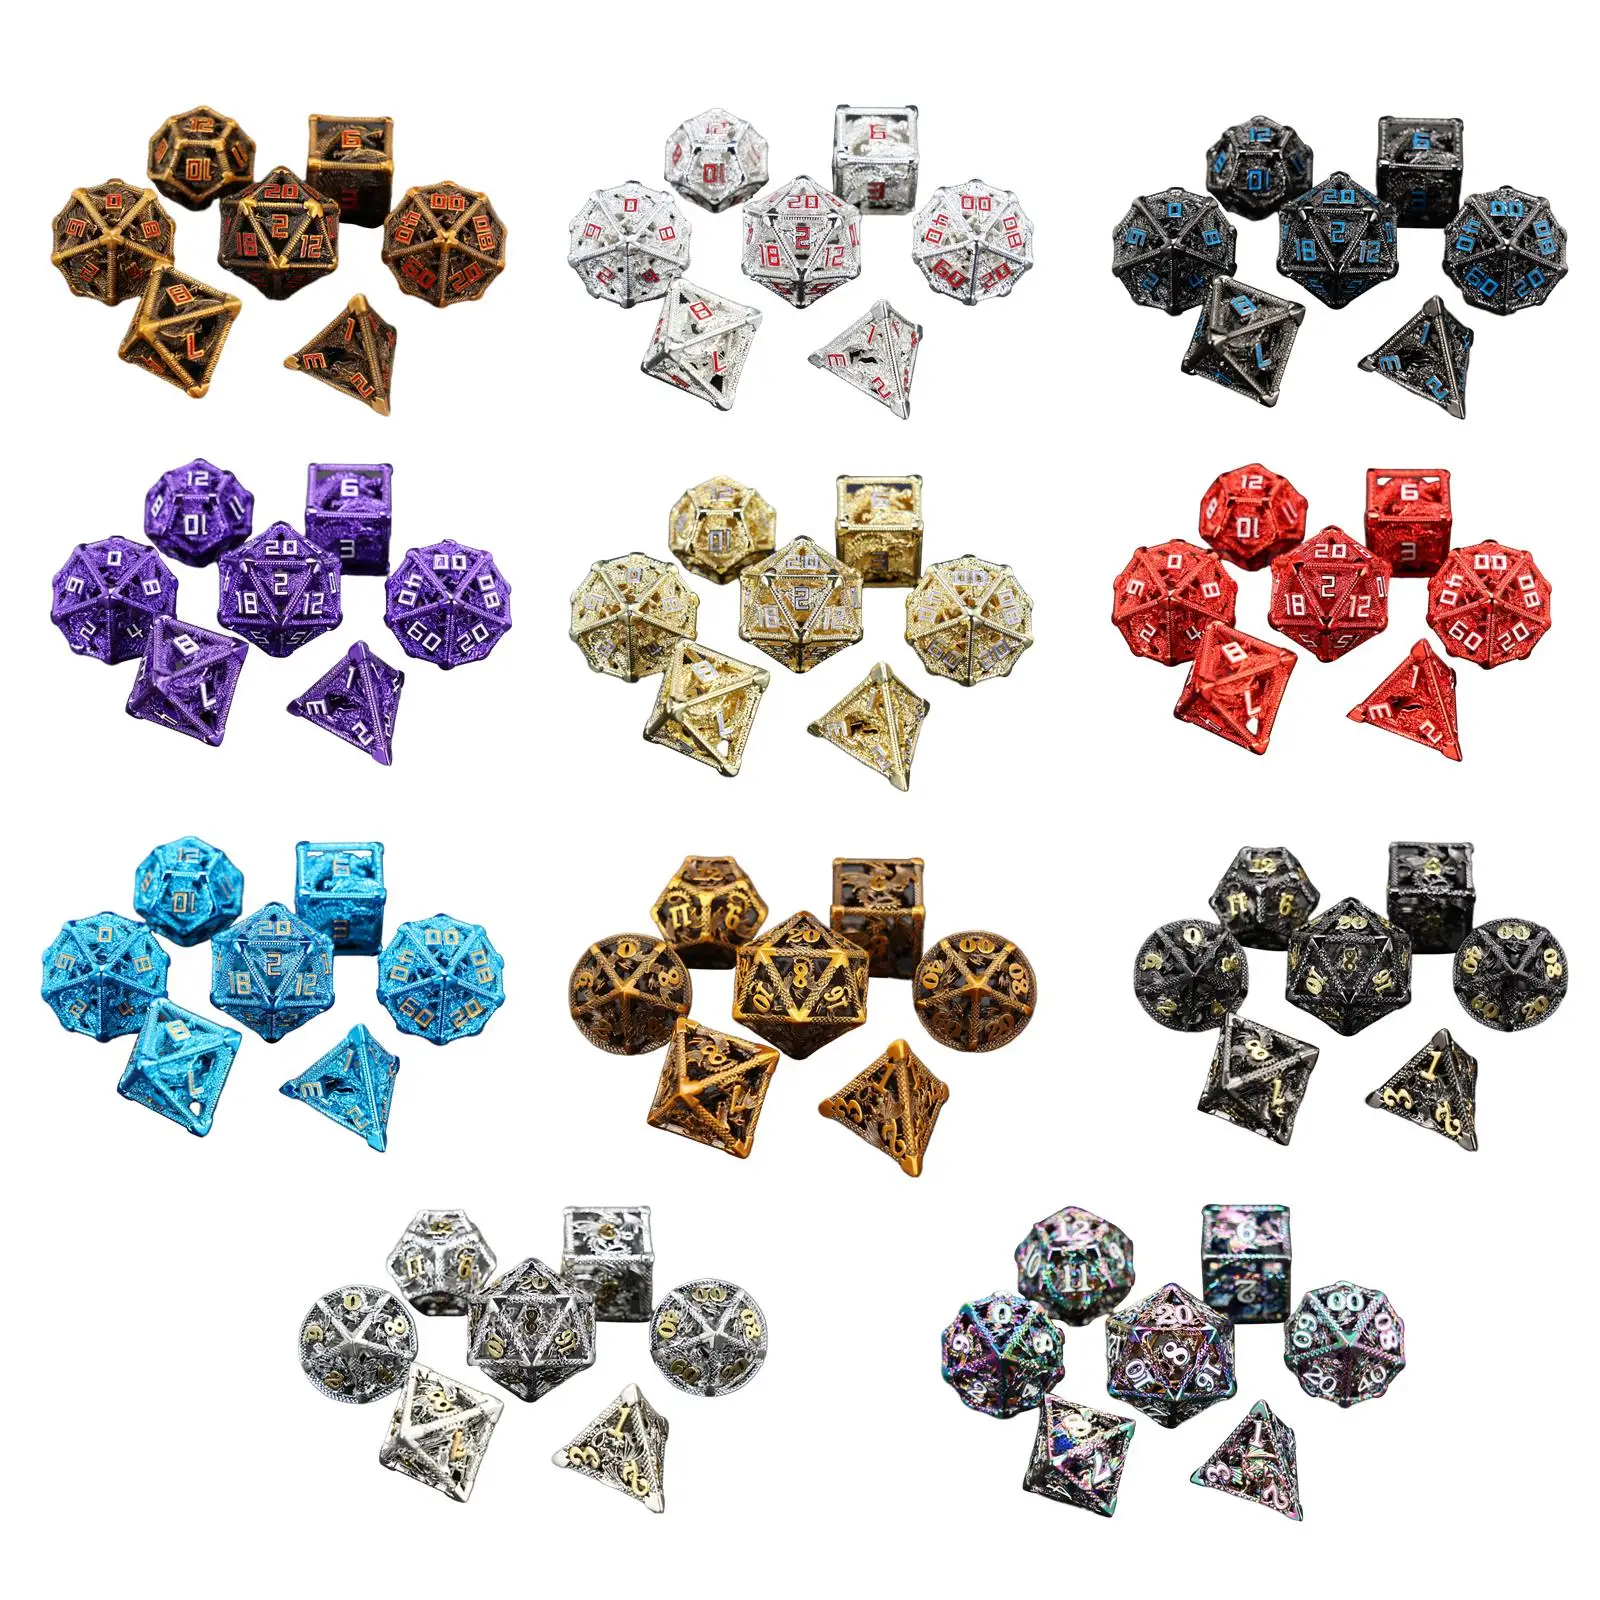 Polyhedral Dice Big Numbers Game Accessories Family Games Party Supply Props